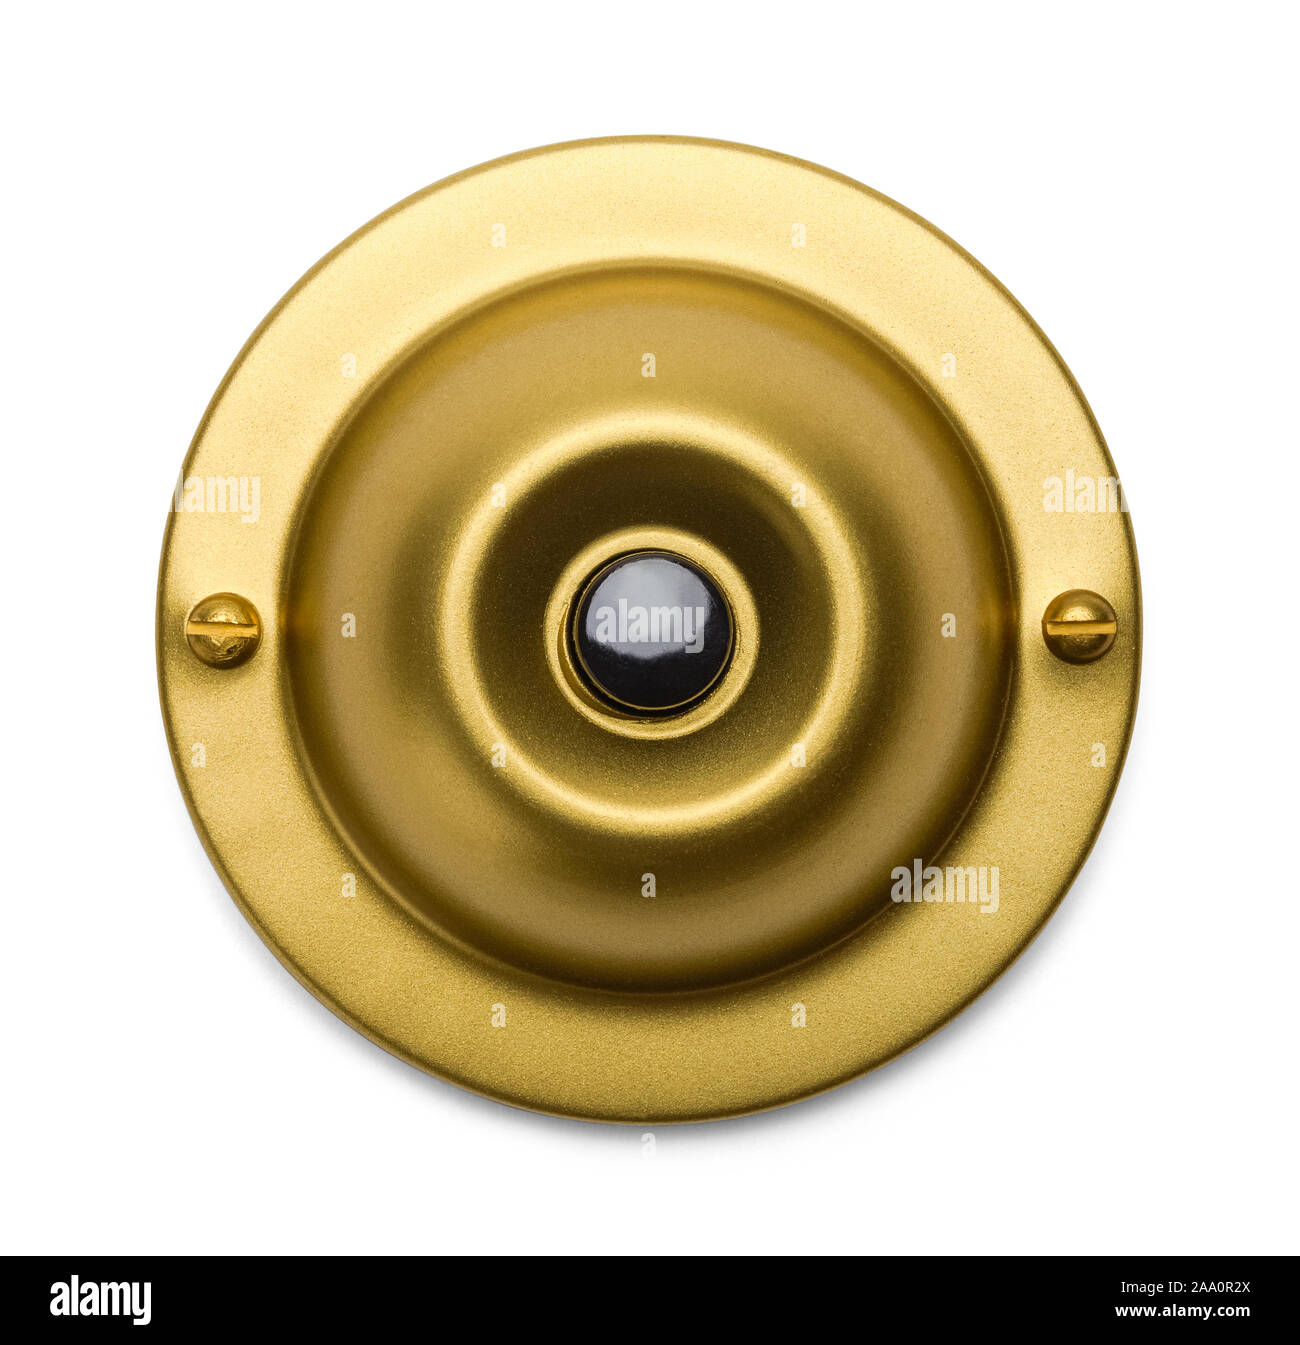 Round Brass Doorbell Isolated on White Background. Stock Photo